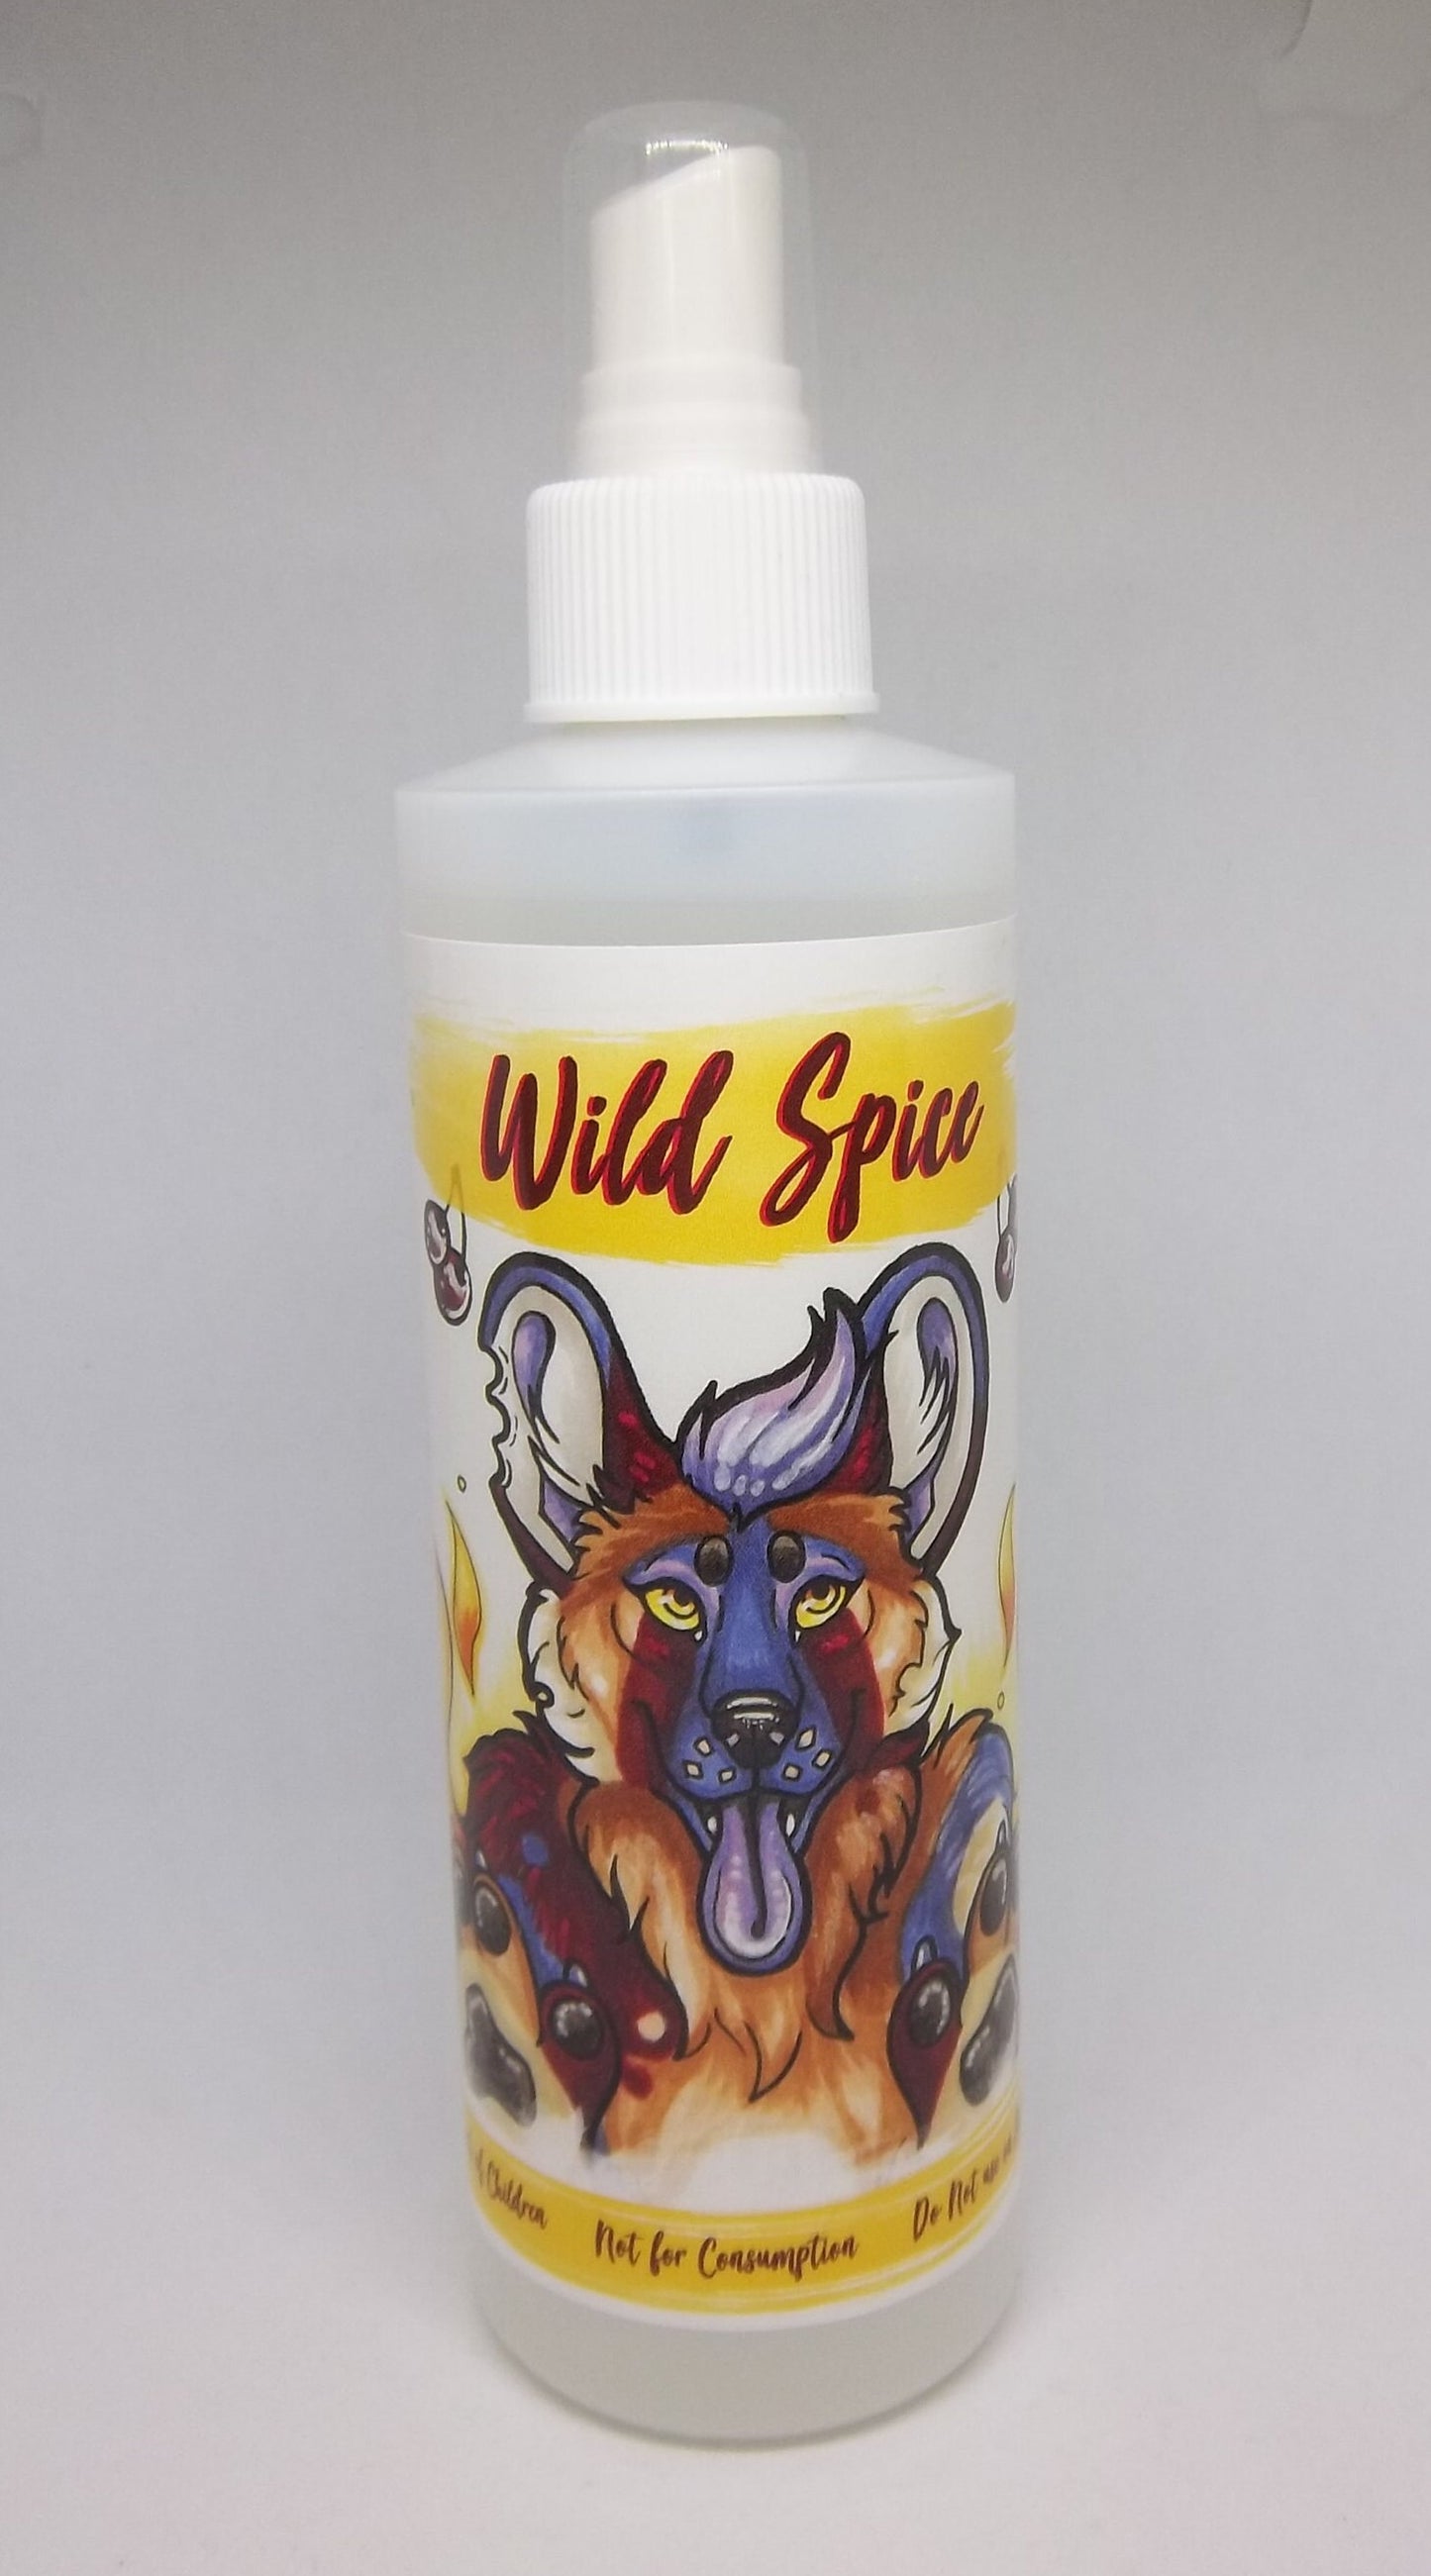 Cherry Clove Fursuit Spray 8oz - Wild Spice Fragrance and Essential Costume Cleaner